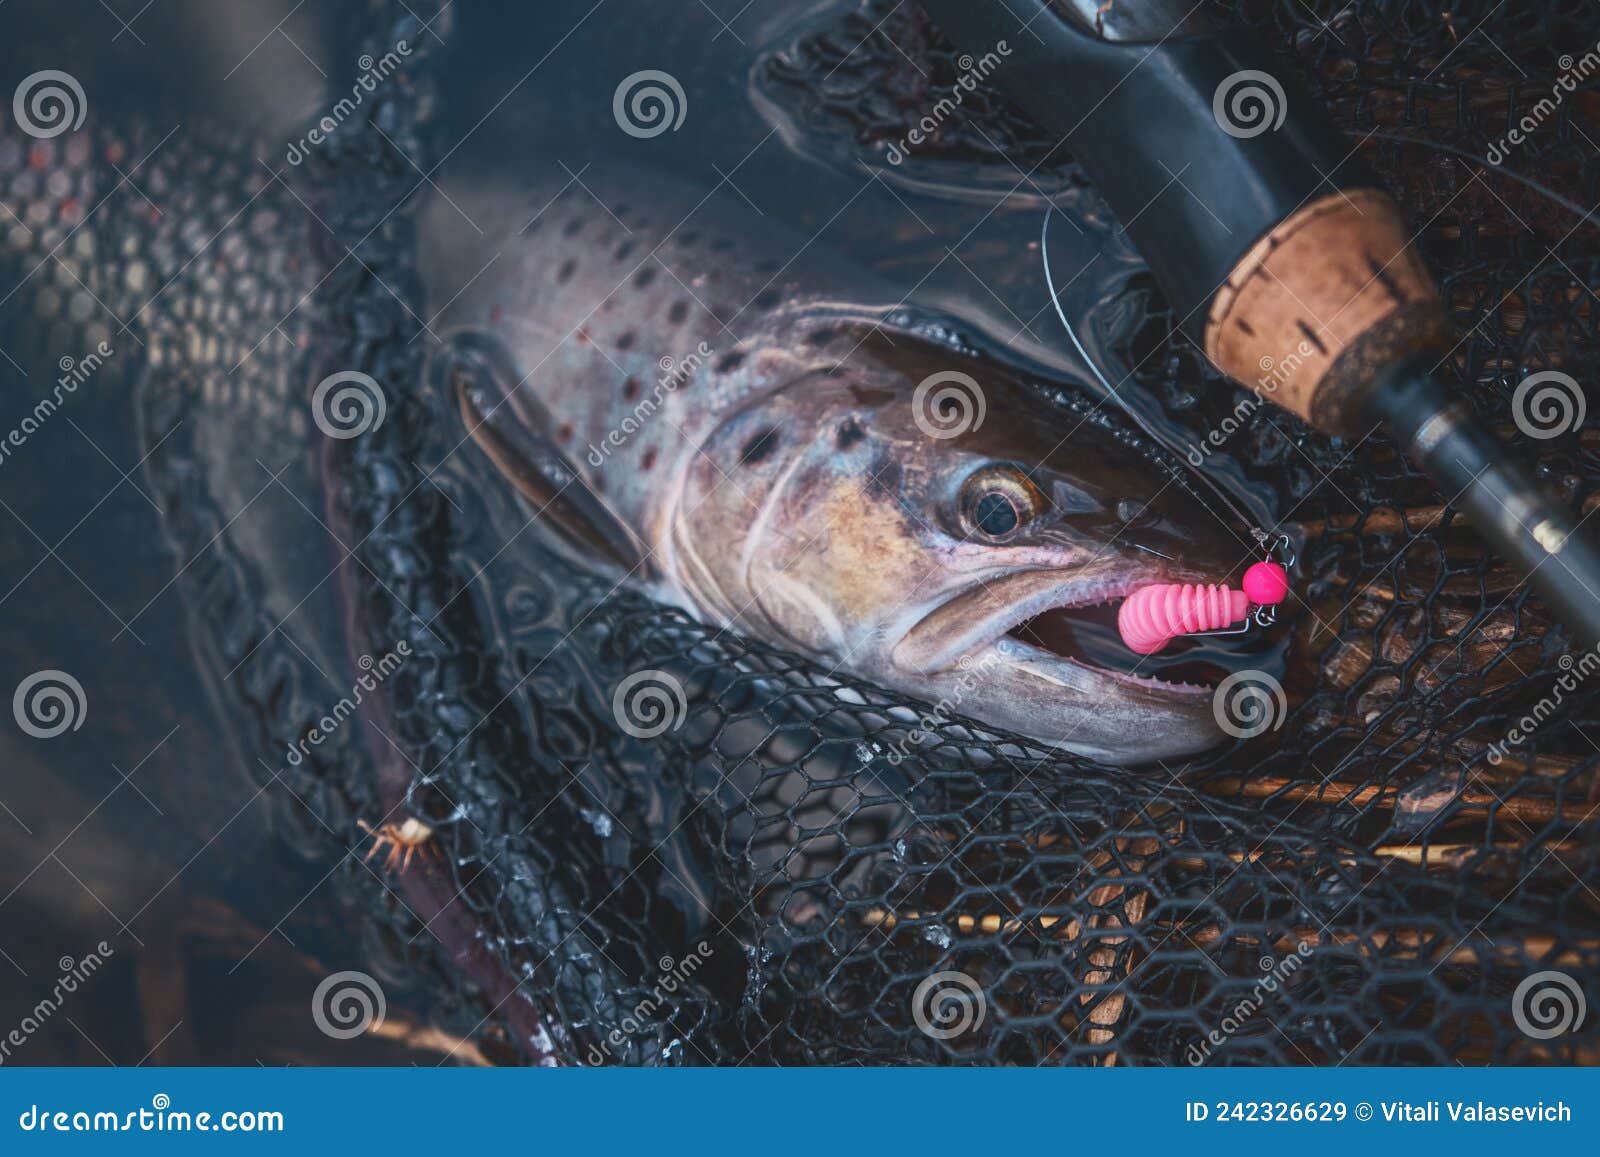 Trout Caught on Soft Plastic Bait Stock Image - Image of angler